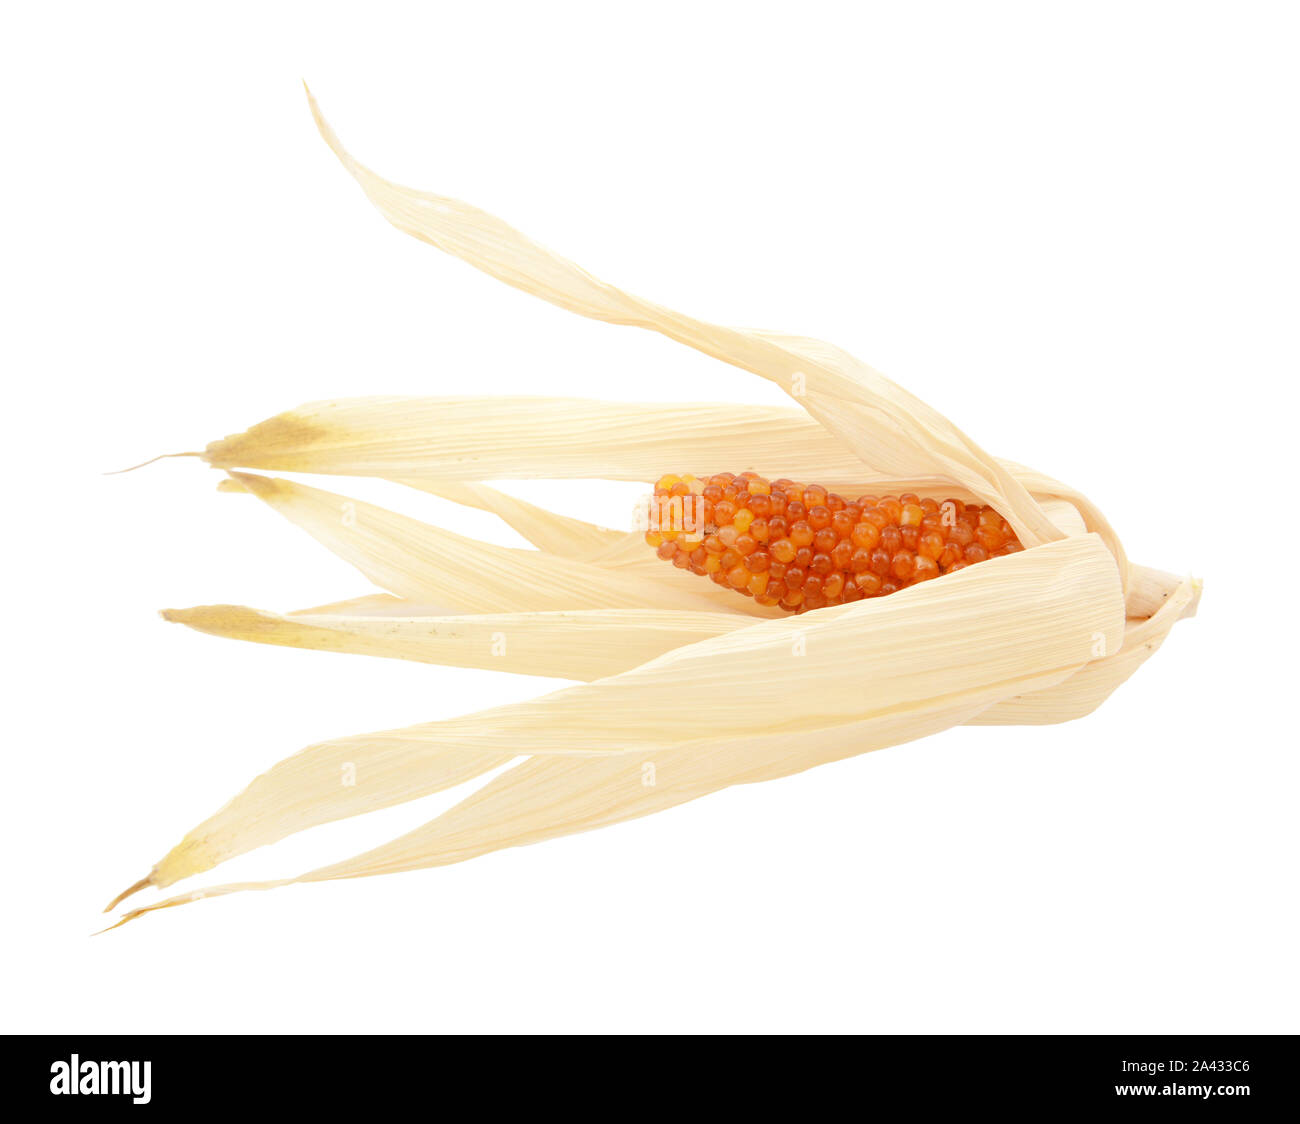 Dried Indian corn with red niblets, surrounded by pale yellow husks on a white background Stock Photo